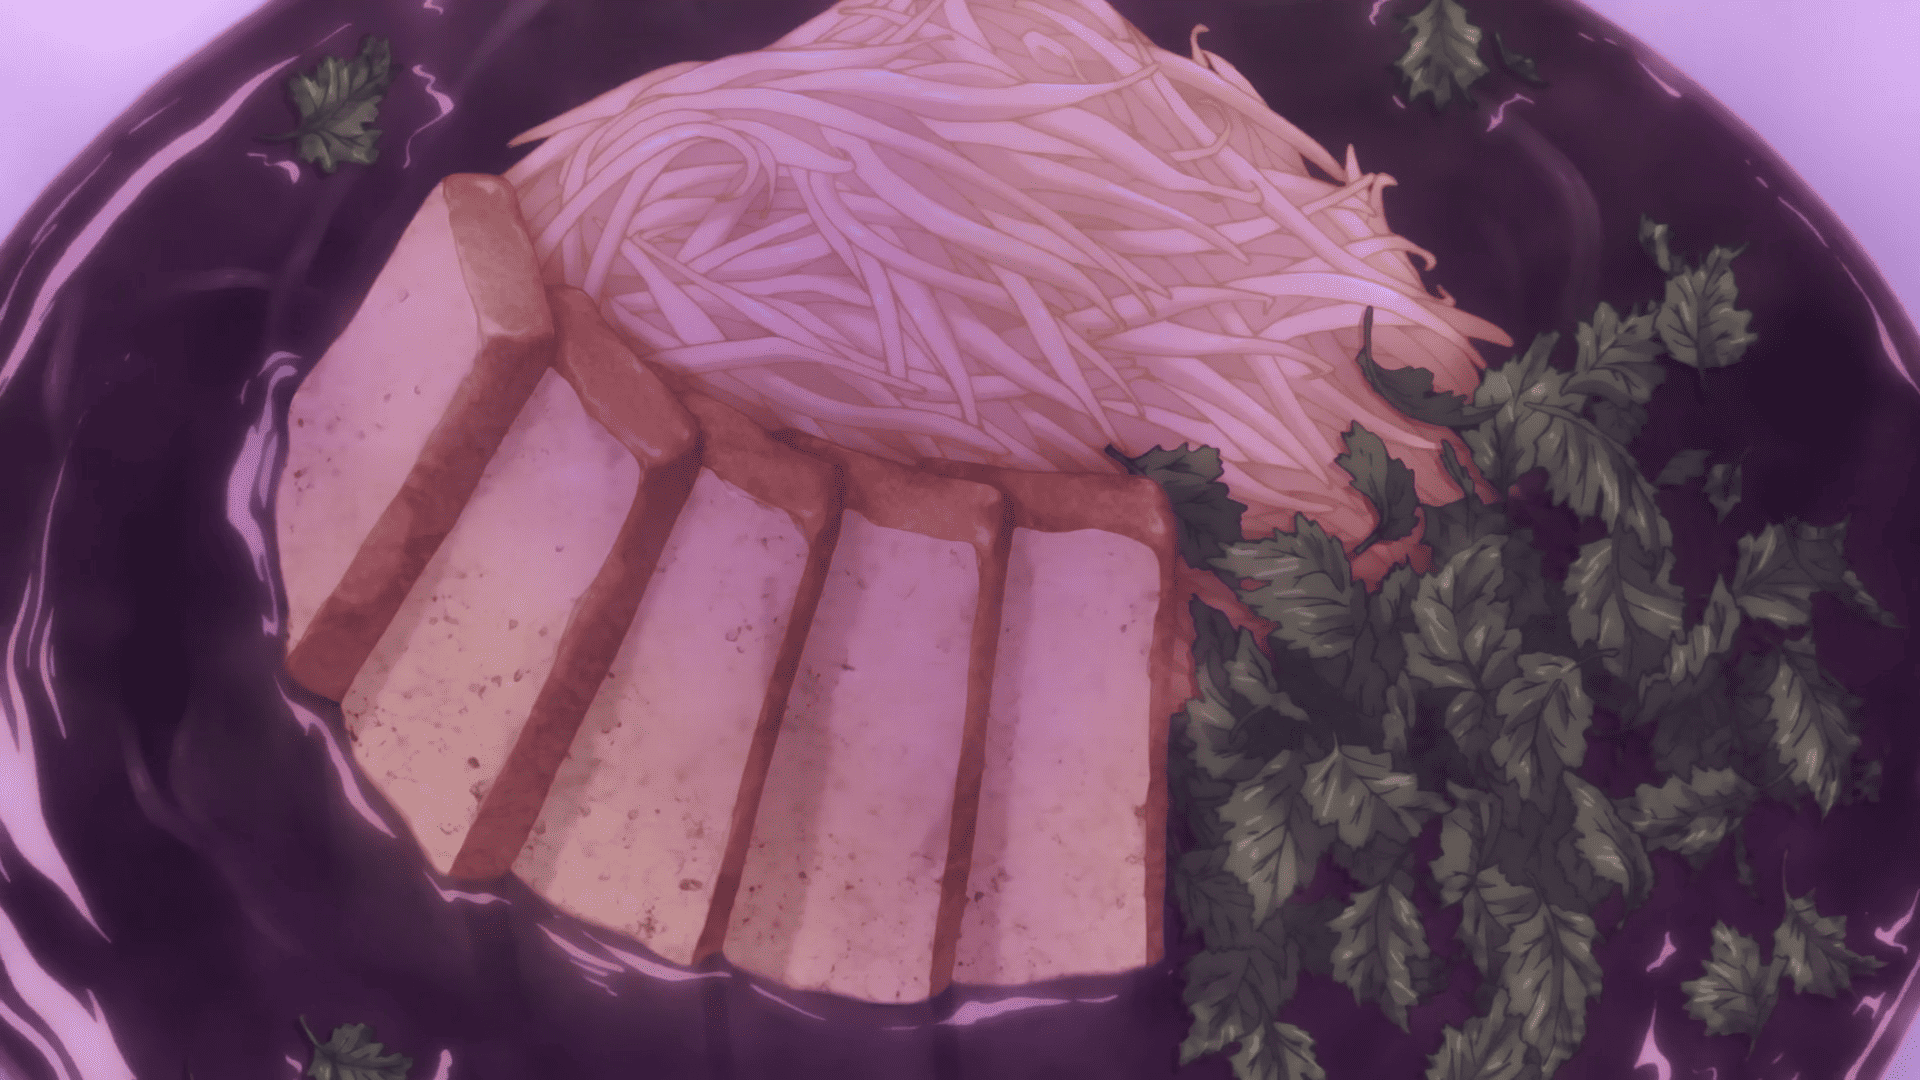 A bowl of jet-black curry laksa with tofu, bean sprouts, and herbs in this image from J.C. Staff